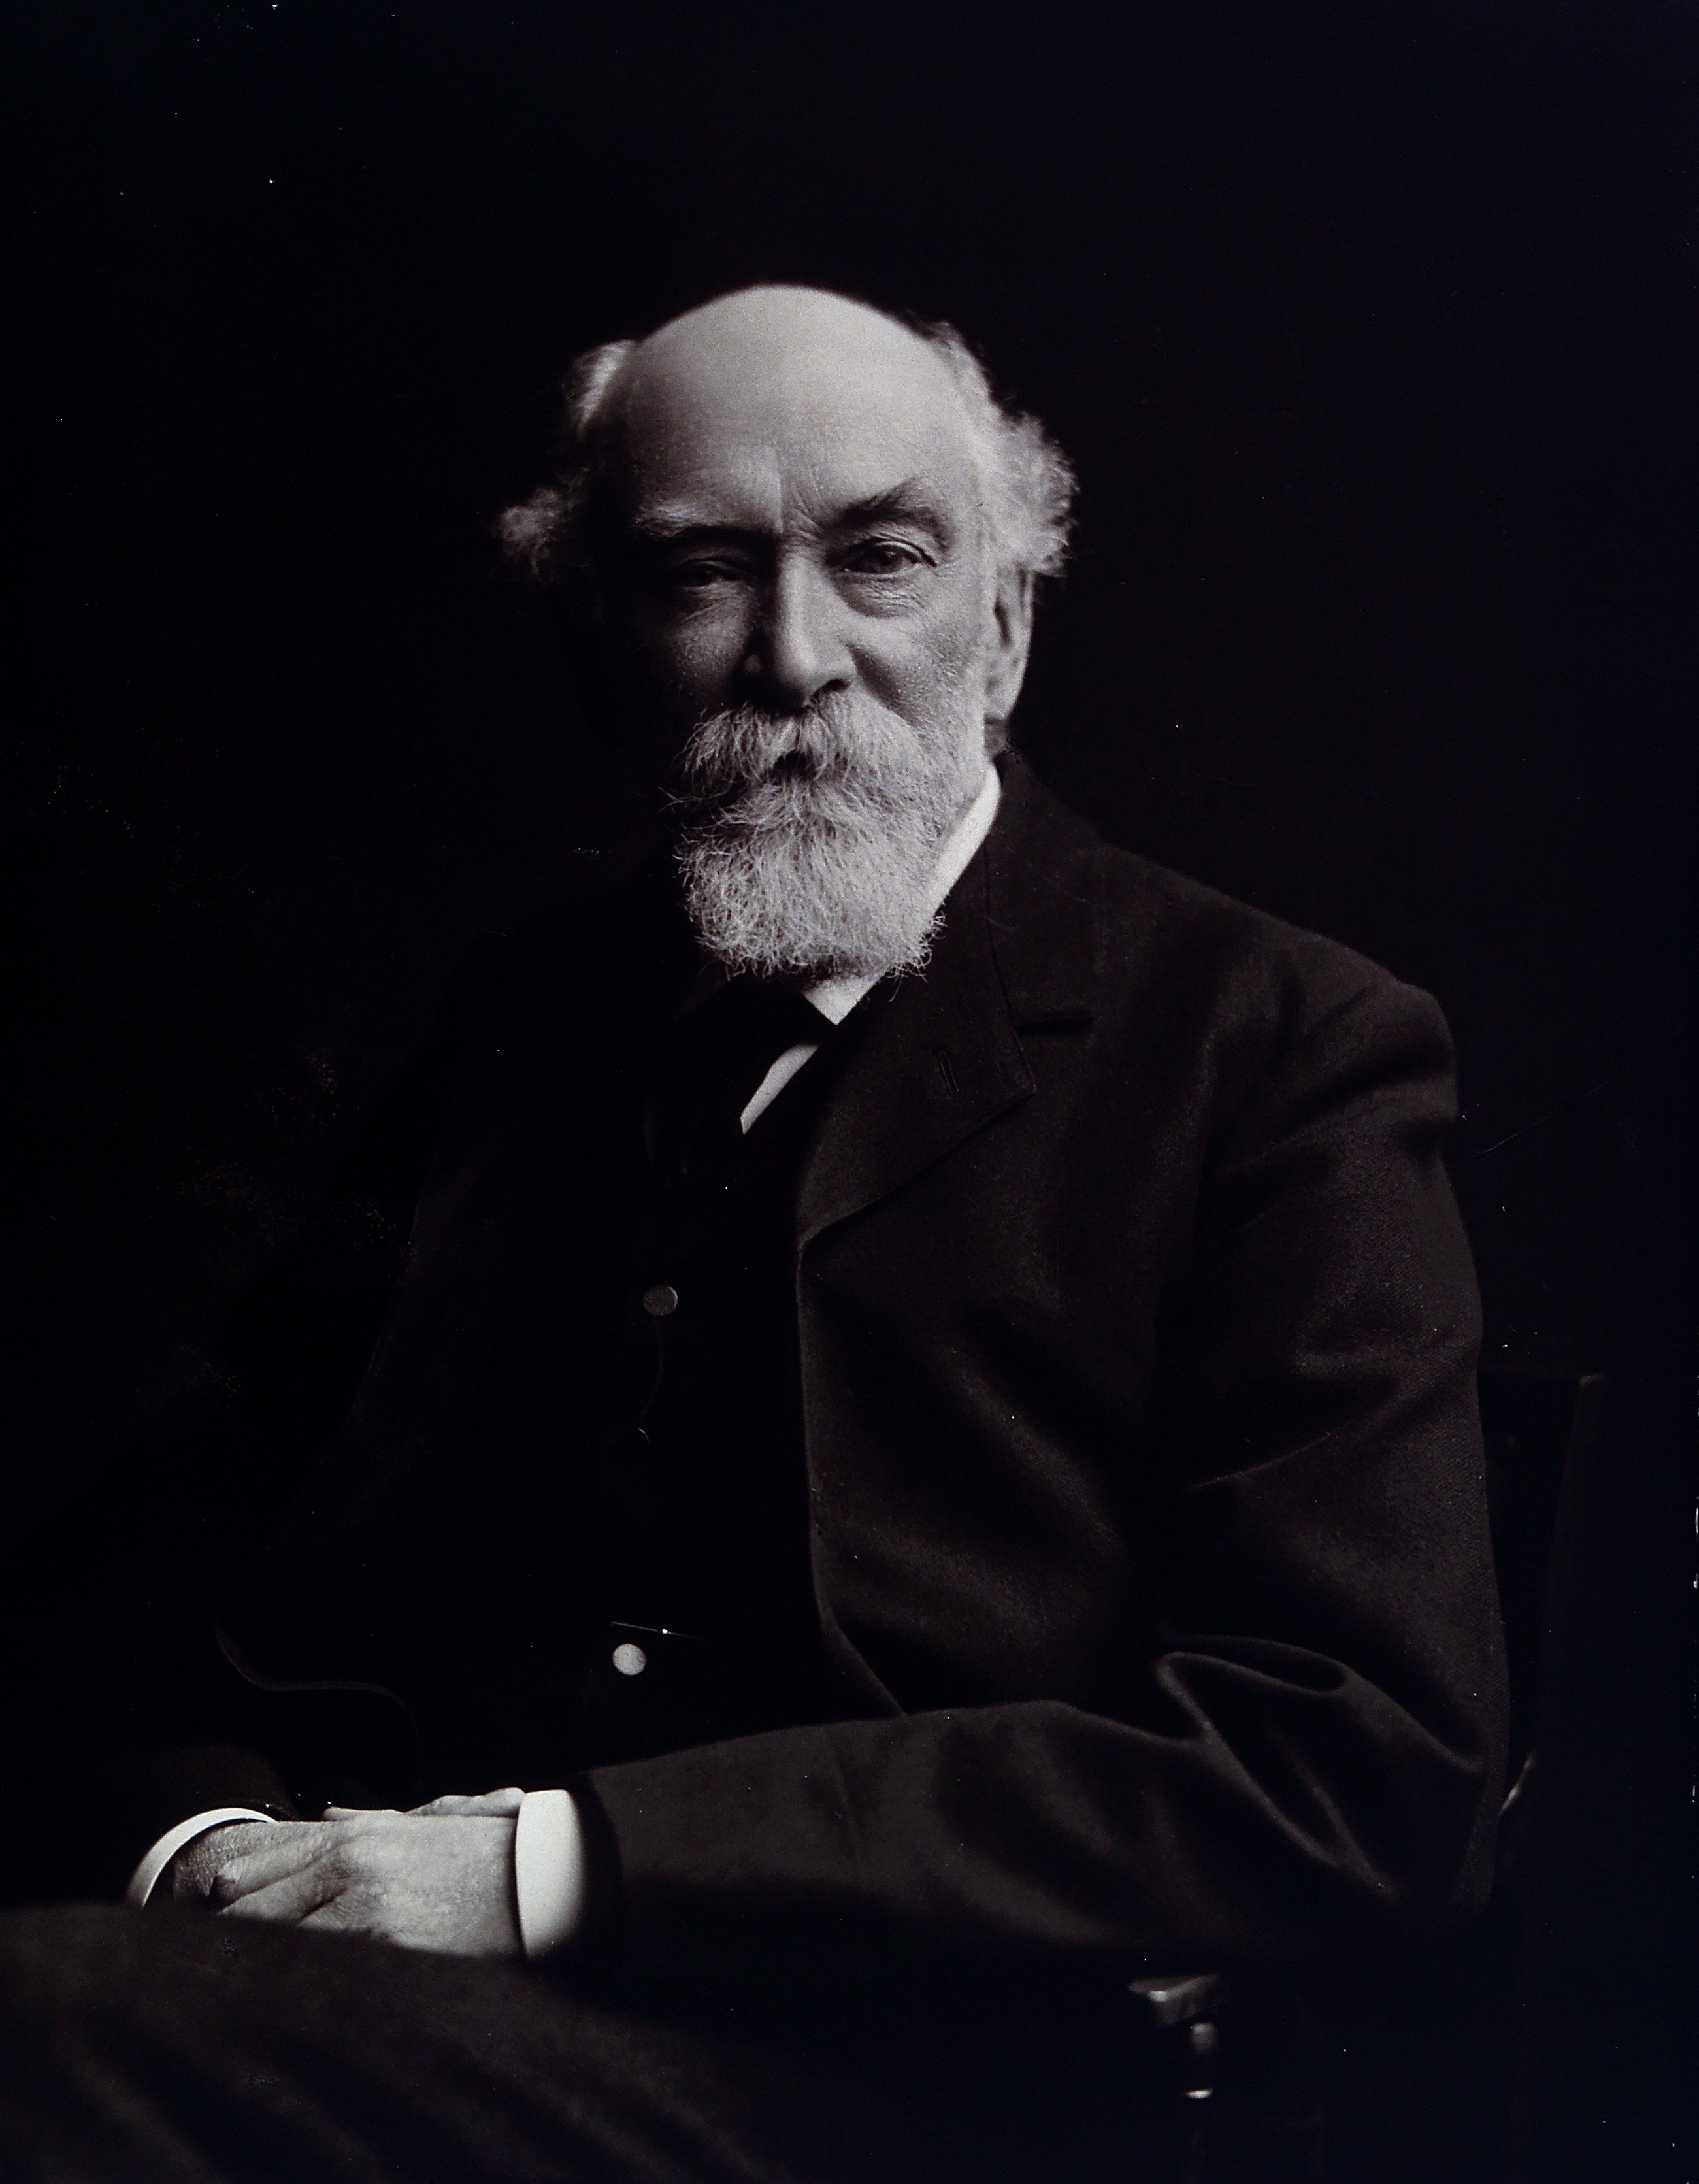 James Burn Russell. Photograph by Annan, Glasgow. Wellcome V0027115